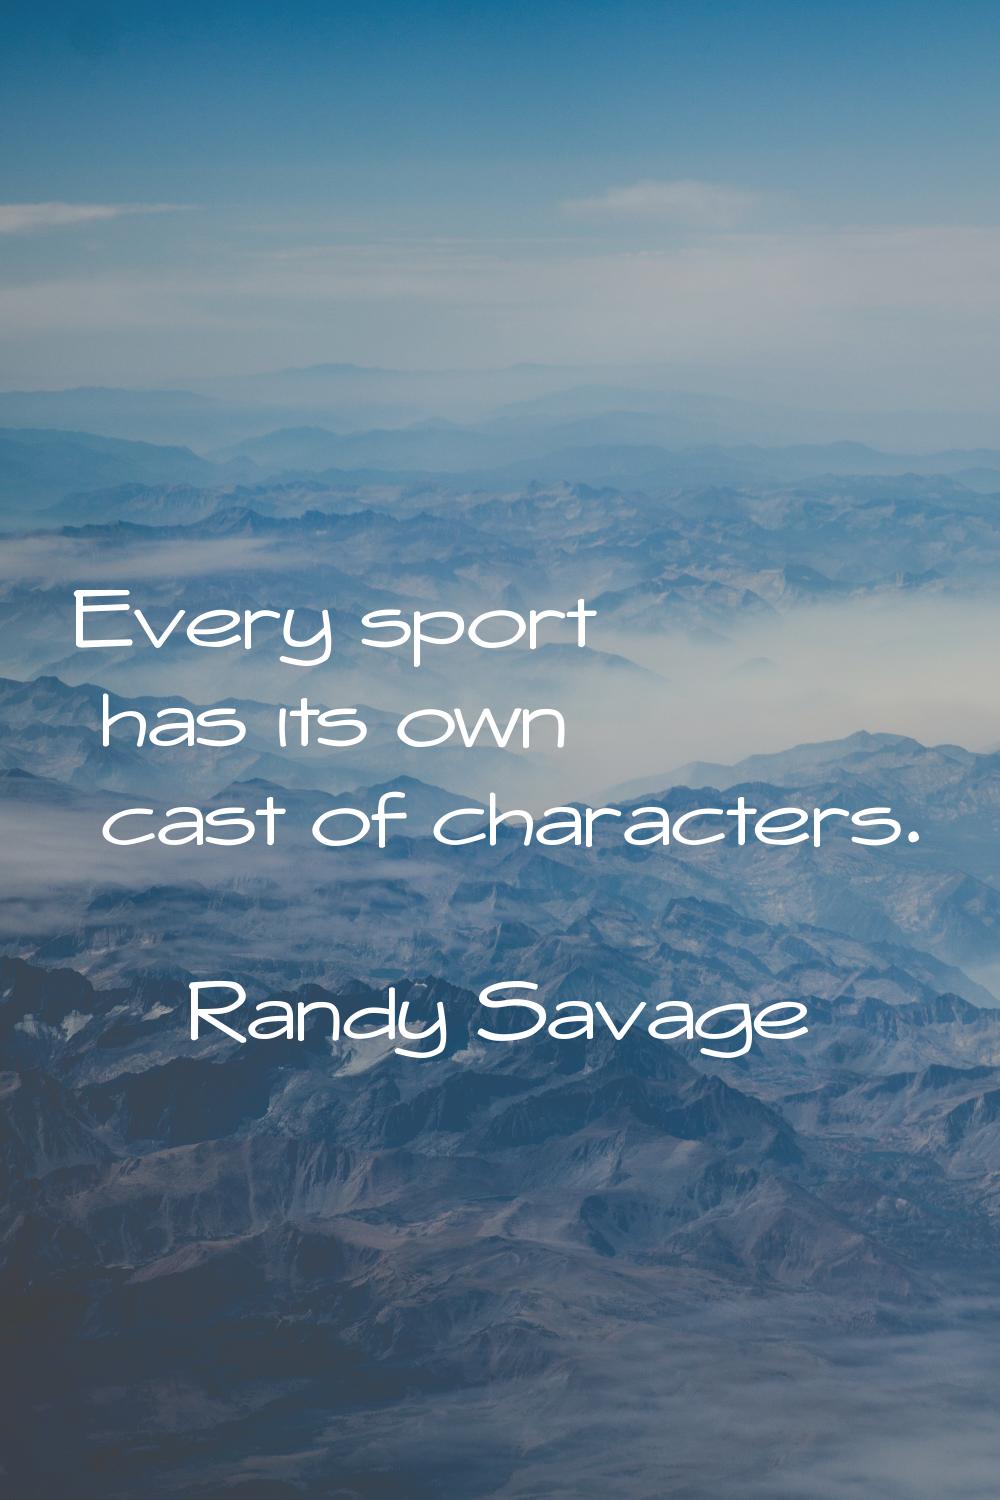 Every sport has its own cast of characters.